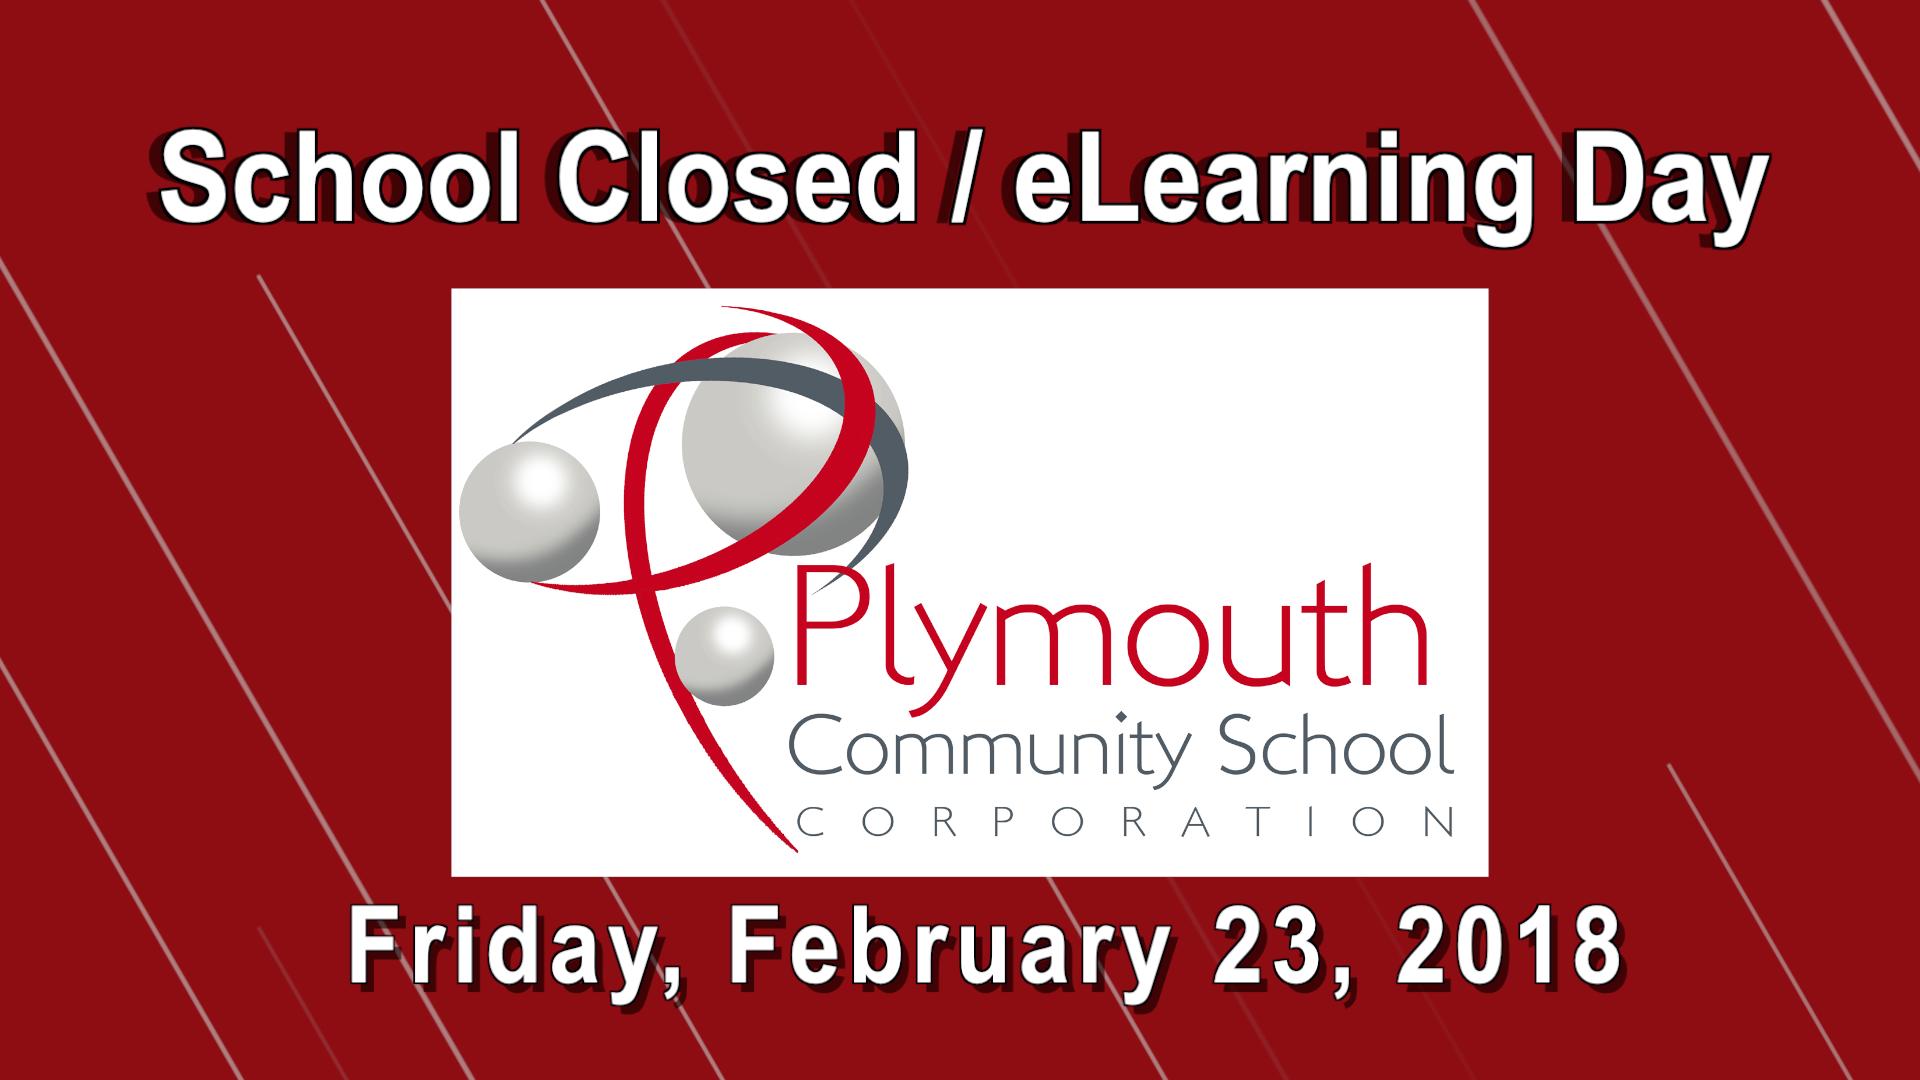 School Closed/eLearning Day on Februaary 23, 2018 with PCSC logo